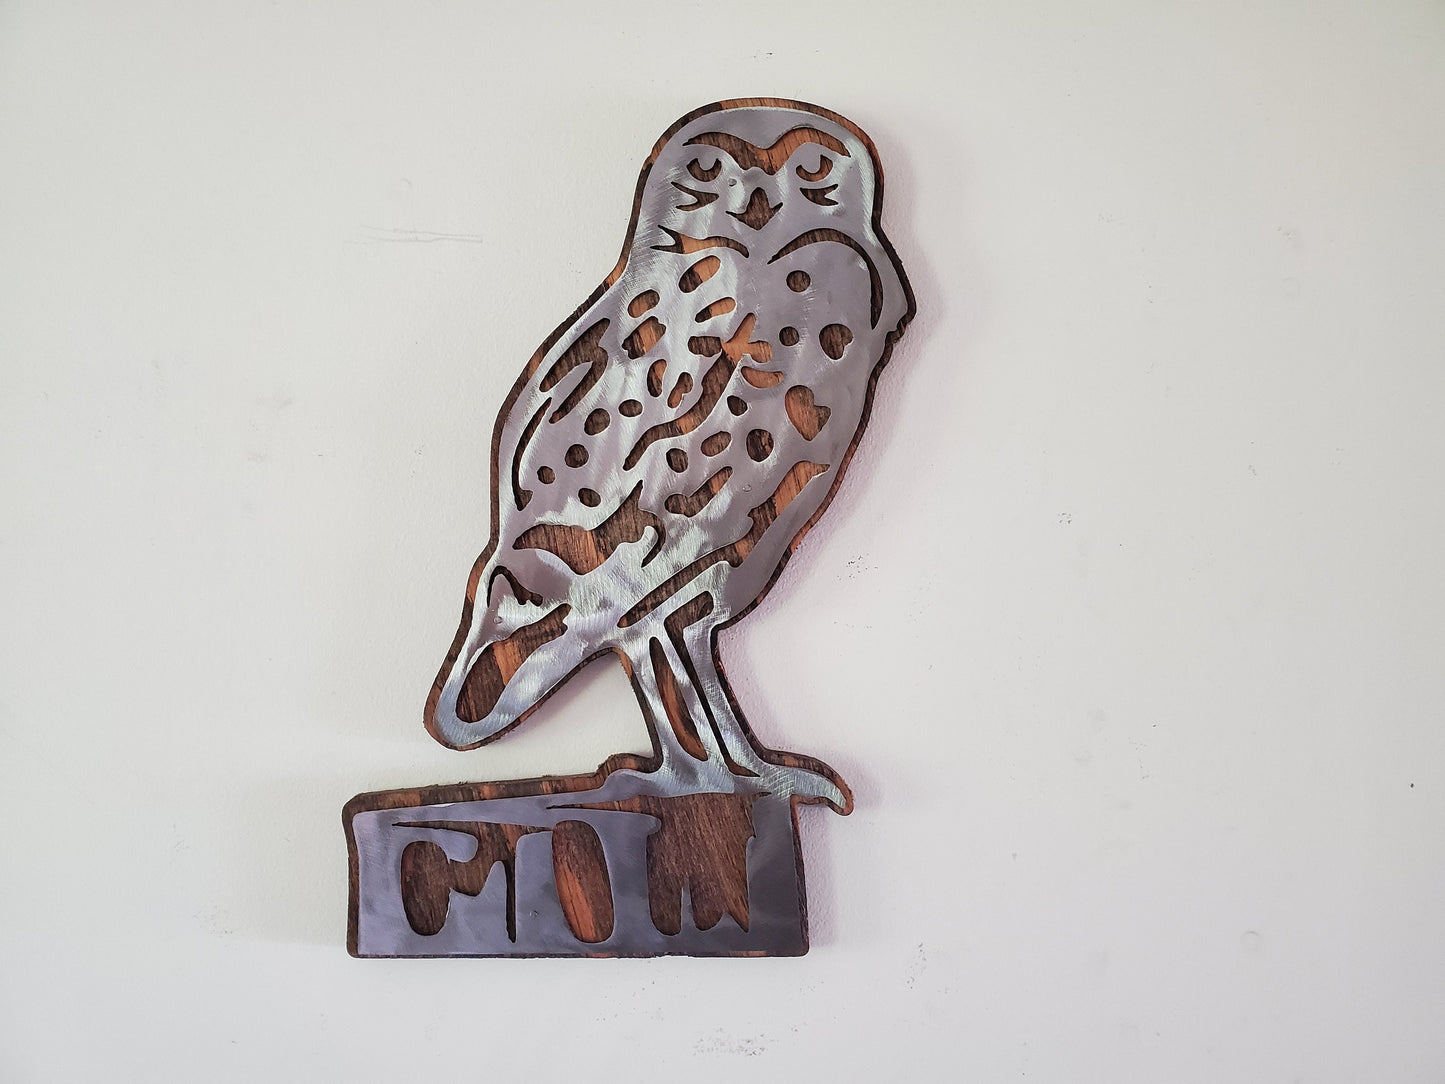 Owl Metal Art on Distressed Wood Background - Whimsical and Rustic Home Decor Piece